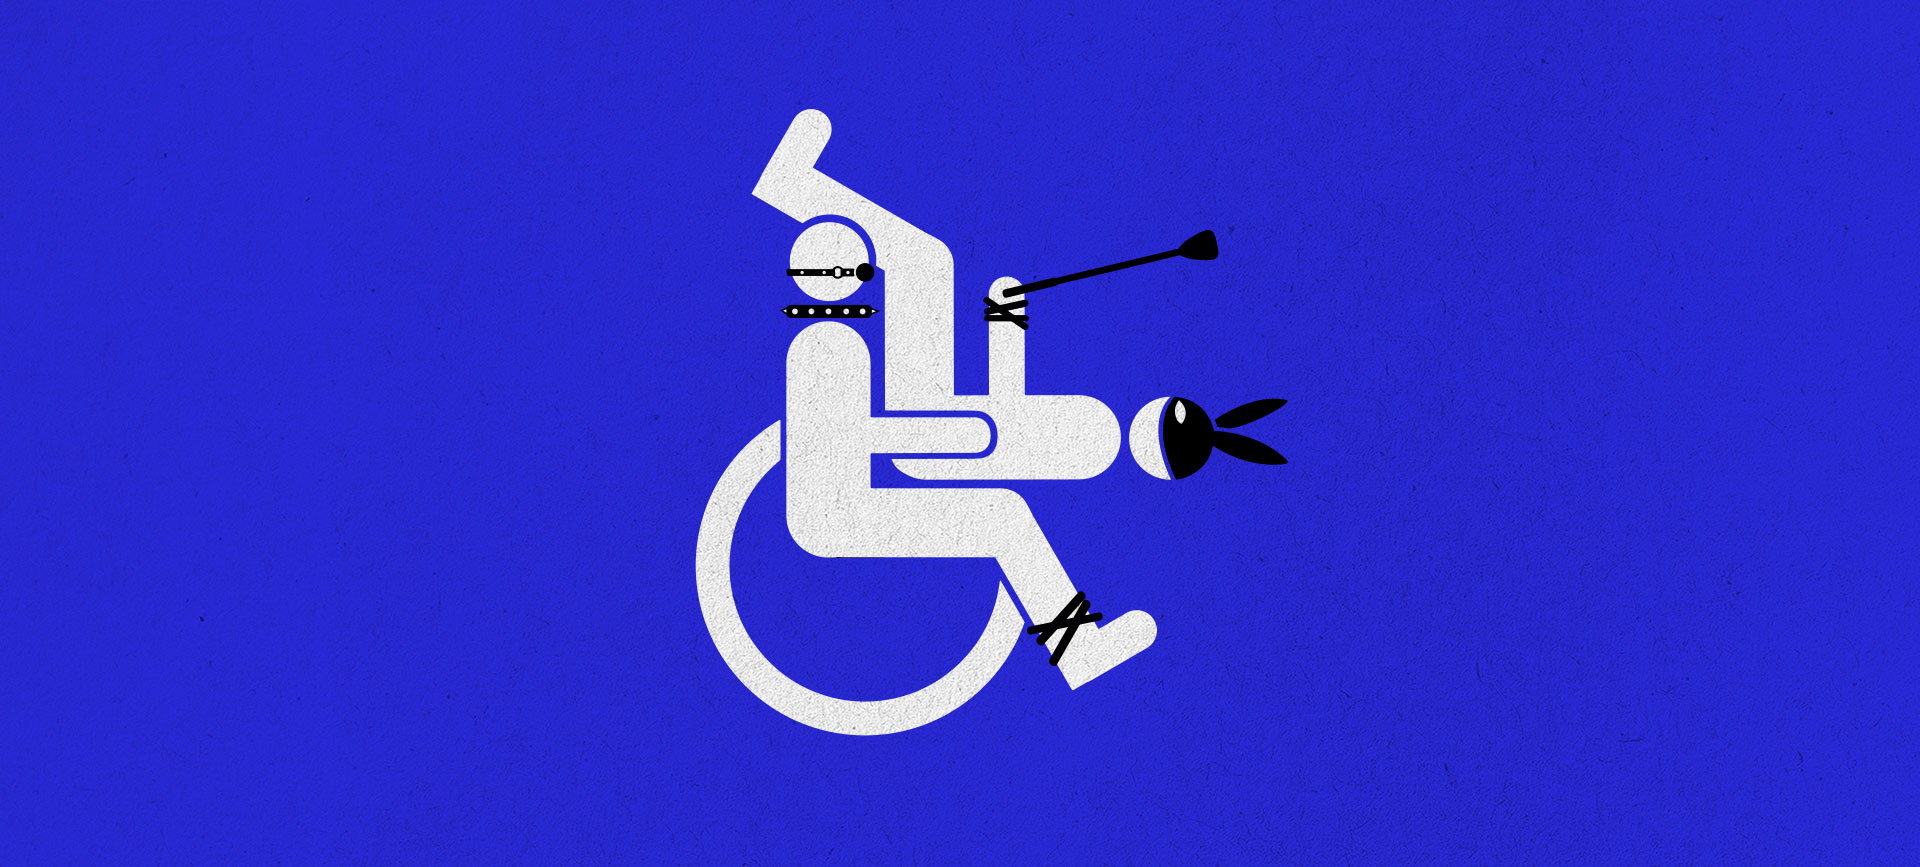 Two-people-in-bondage-have-sex-in-one-wheelchair-that-looks-like-the-handicap-symbol